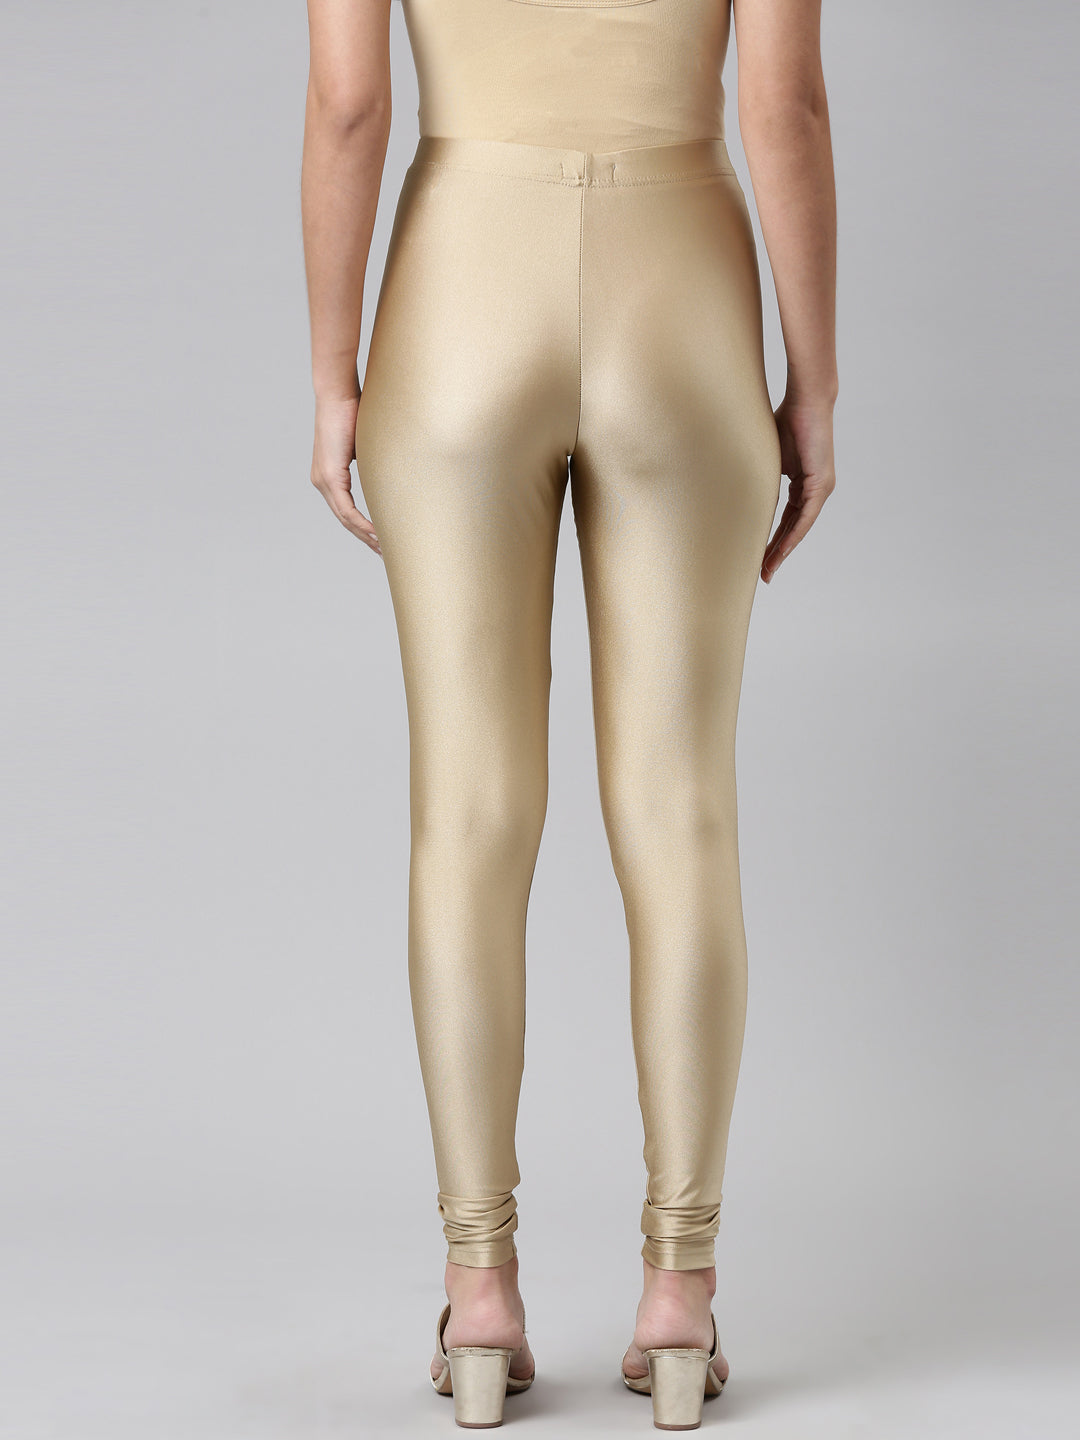 Metallic Faux Leather Leggings - Choose Color Rose Gold or Silver High –  Static Threads